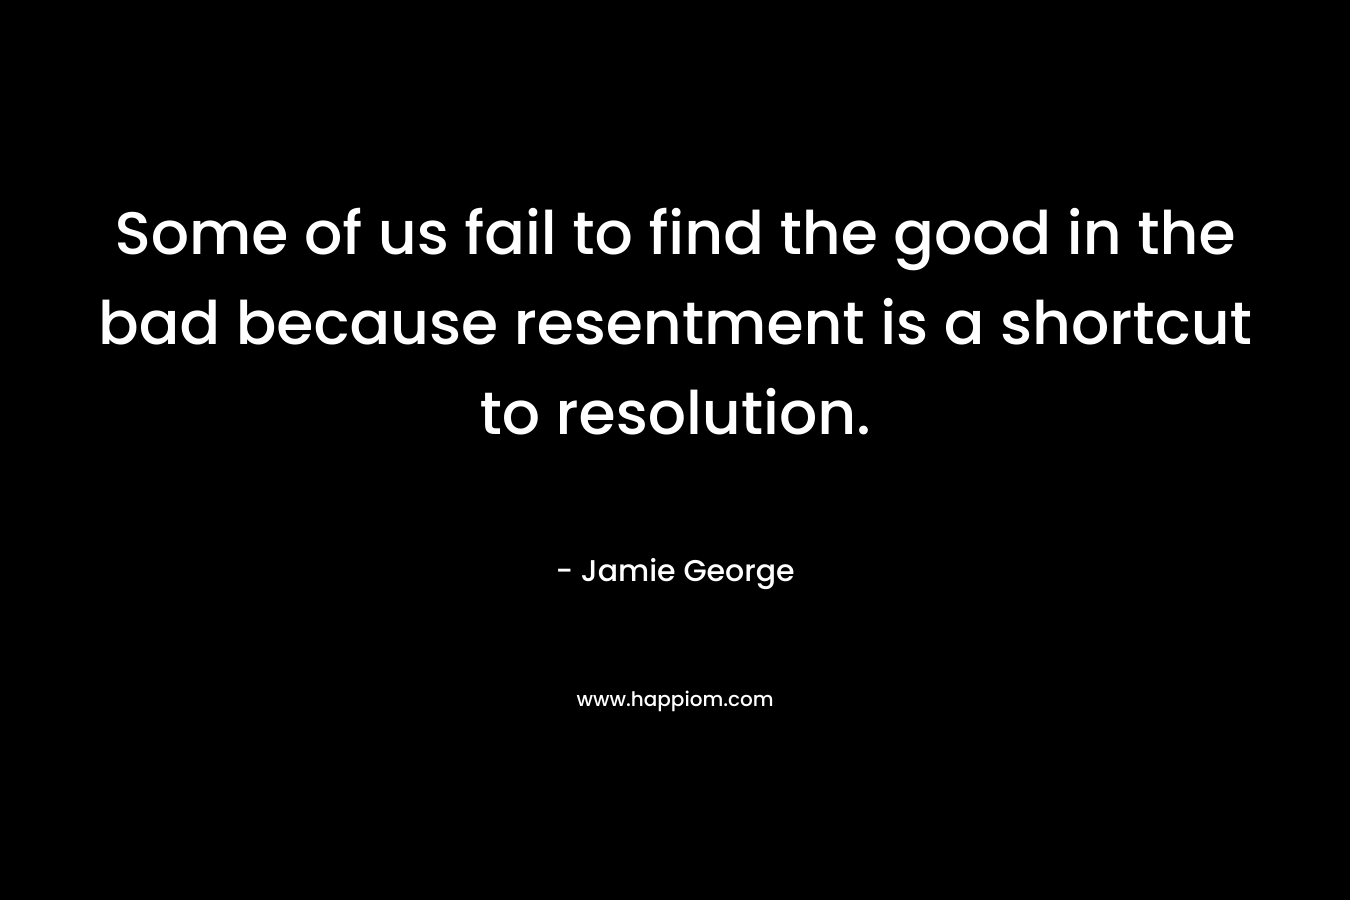 Some of us fail to find the good in the bad because resentment is a shortcut to resolution. – Jamie George